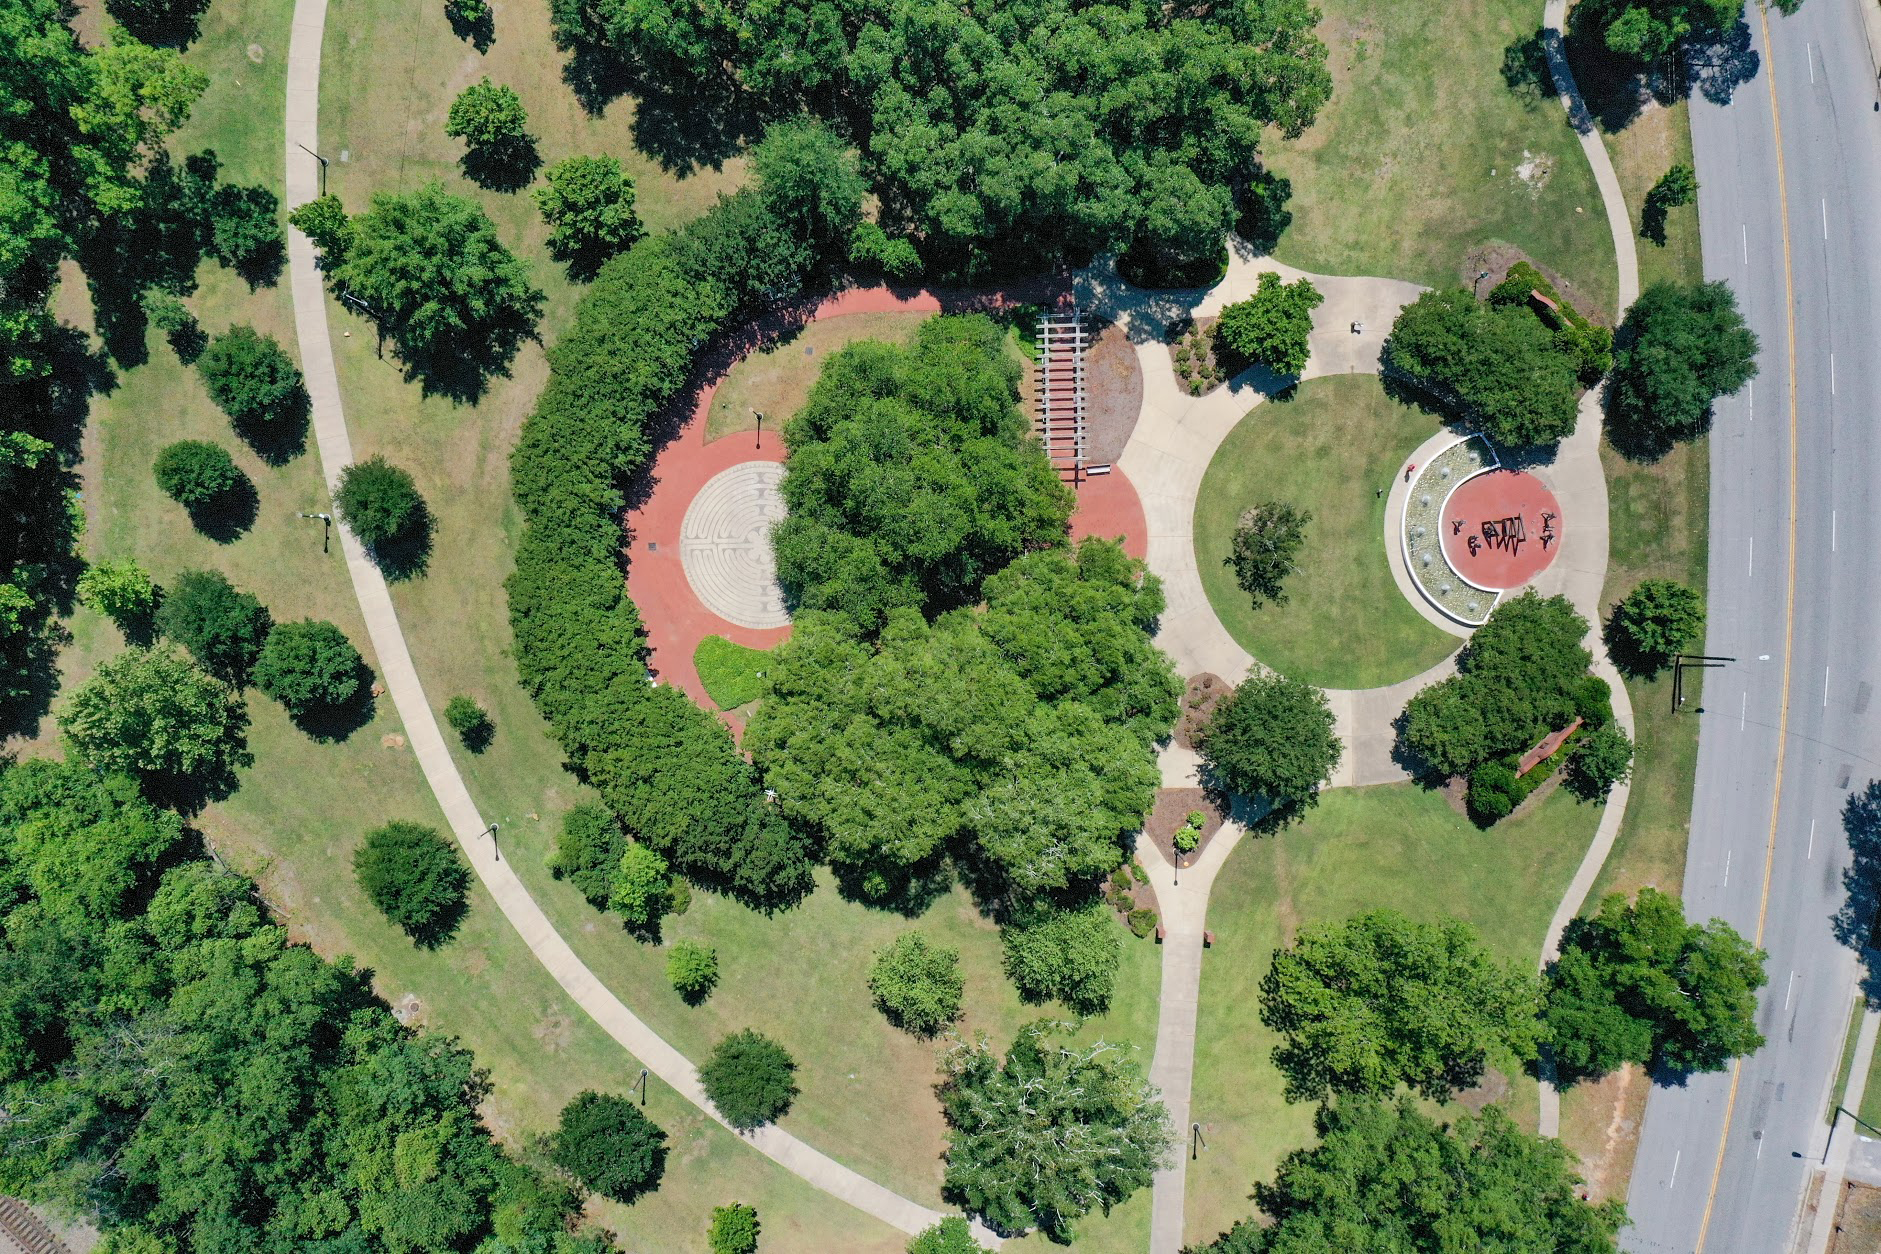 The curvilinear paths, formal gardens, and stately trees define Maxcy Gregg Park along Blossom Street. 